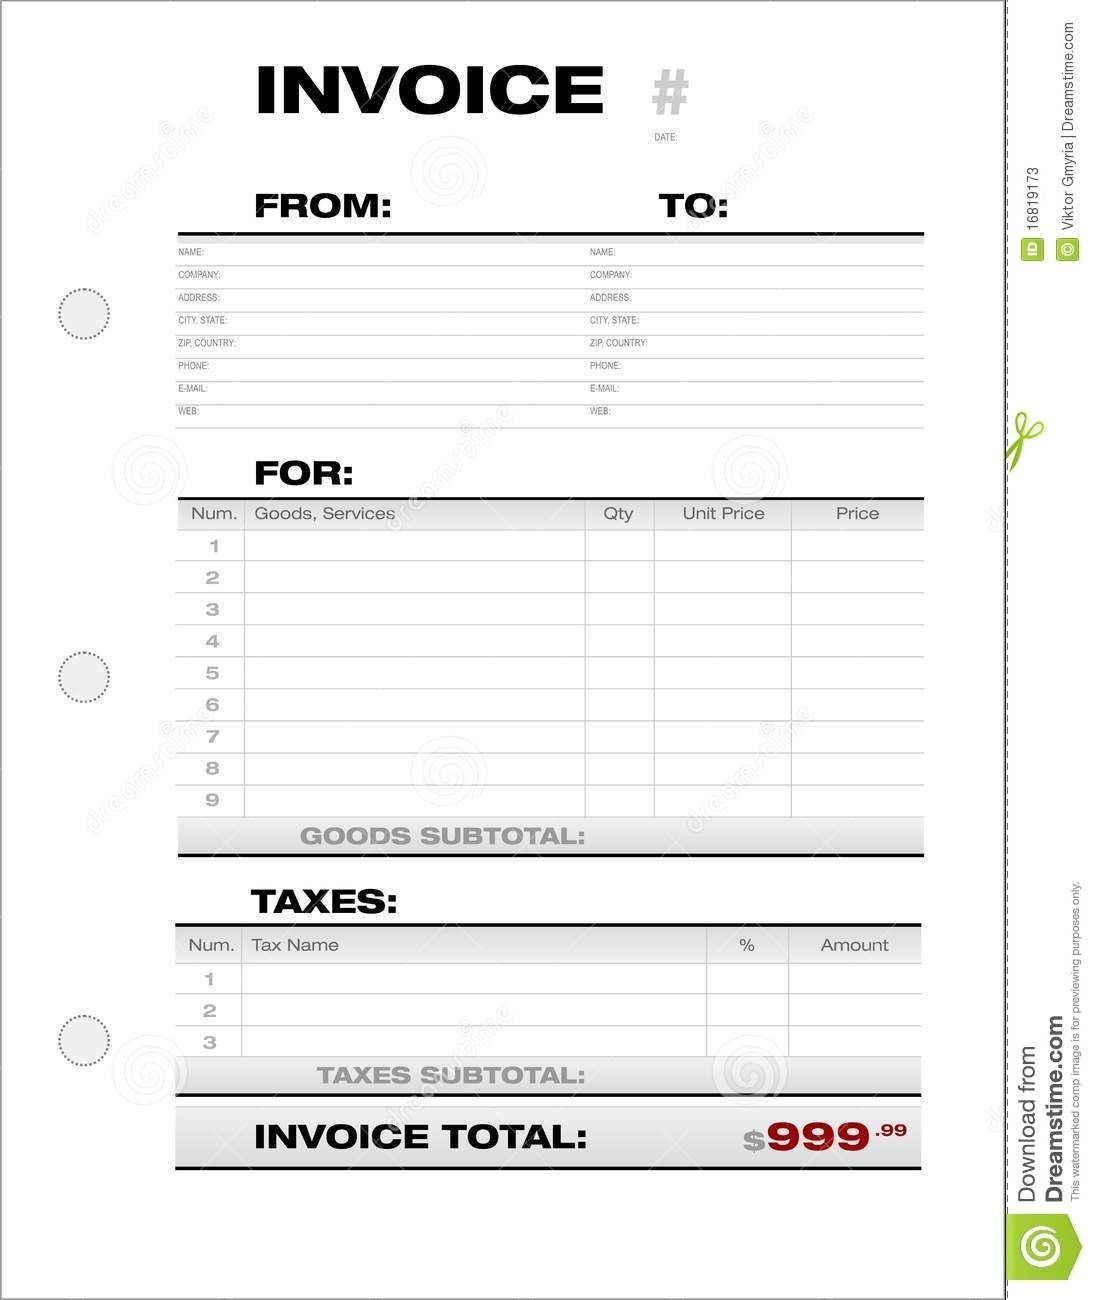 blank invoice stock photos image 16819173 download blank invoice